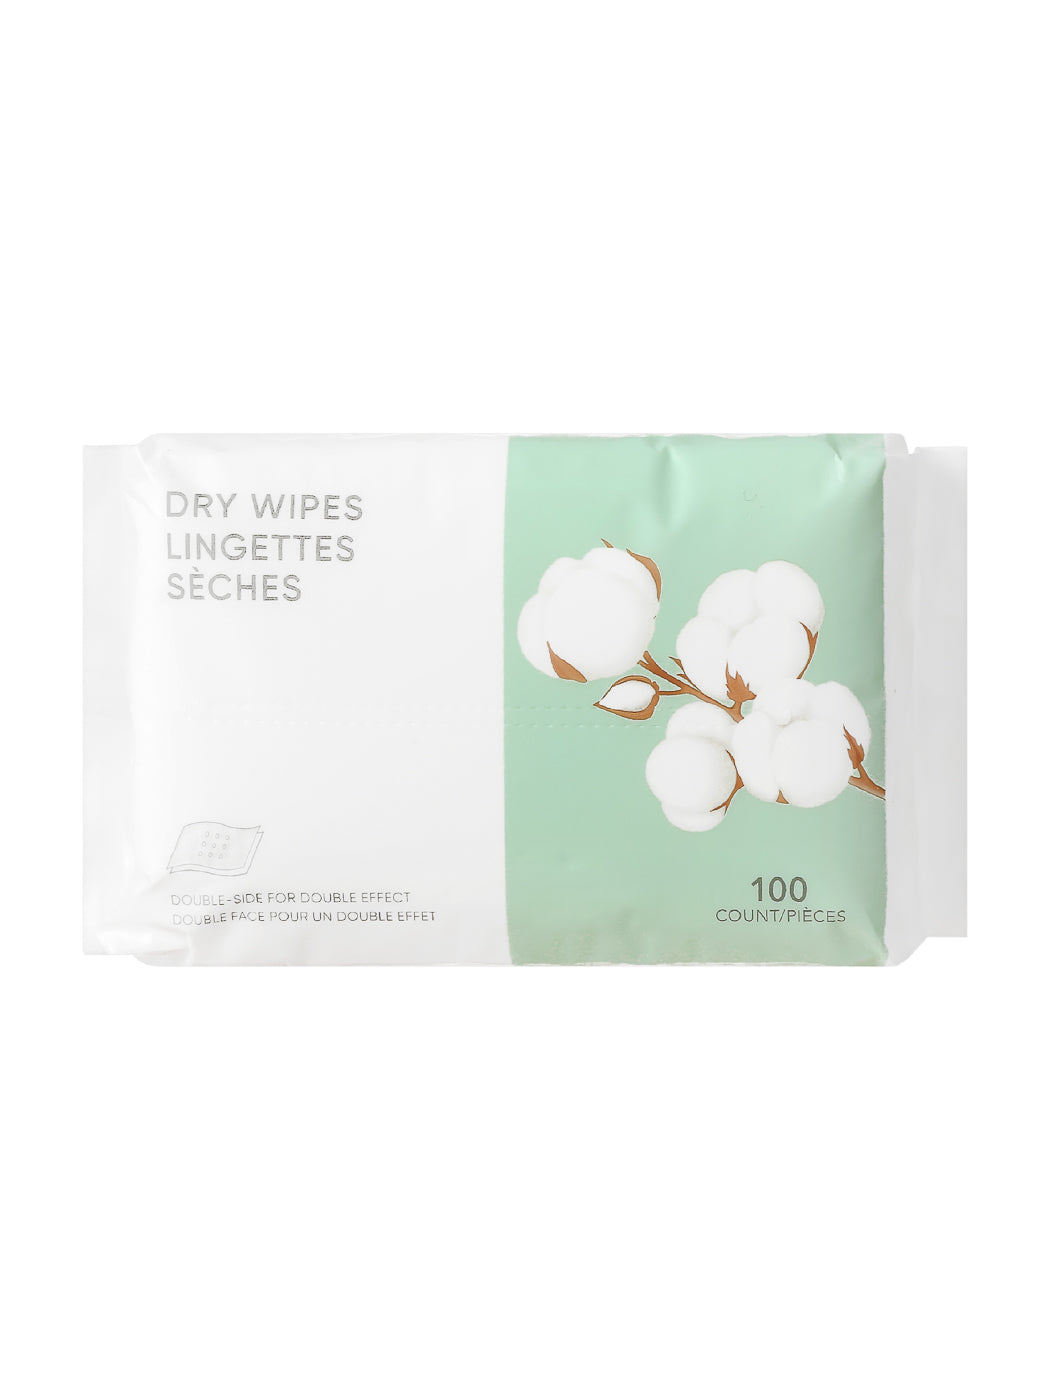 MINISO SOFT DOUBLE-SIDE DRY WIPES ( 100 COUNT ) 2008980110106 SKIN CARE & CLEANSING PRODUCTS